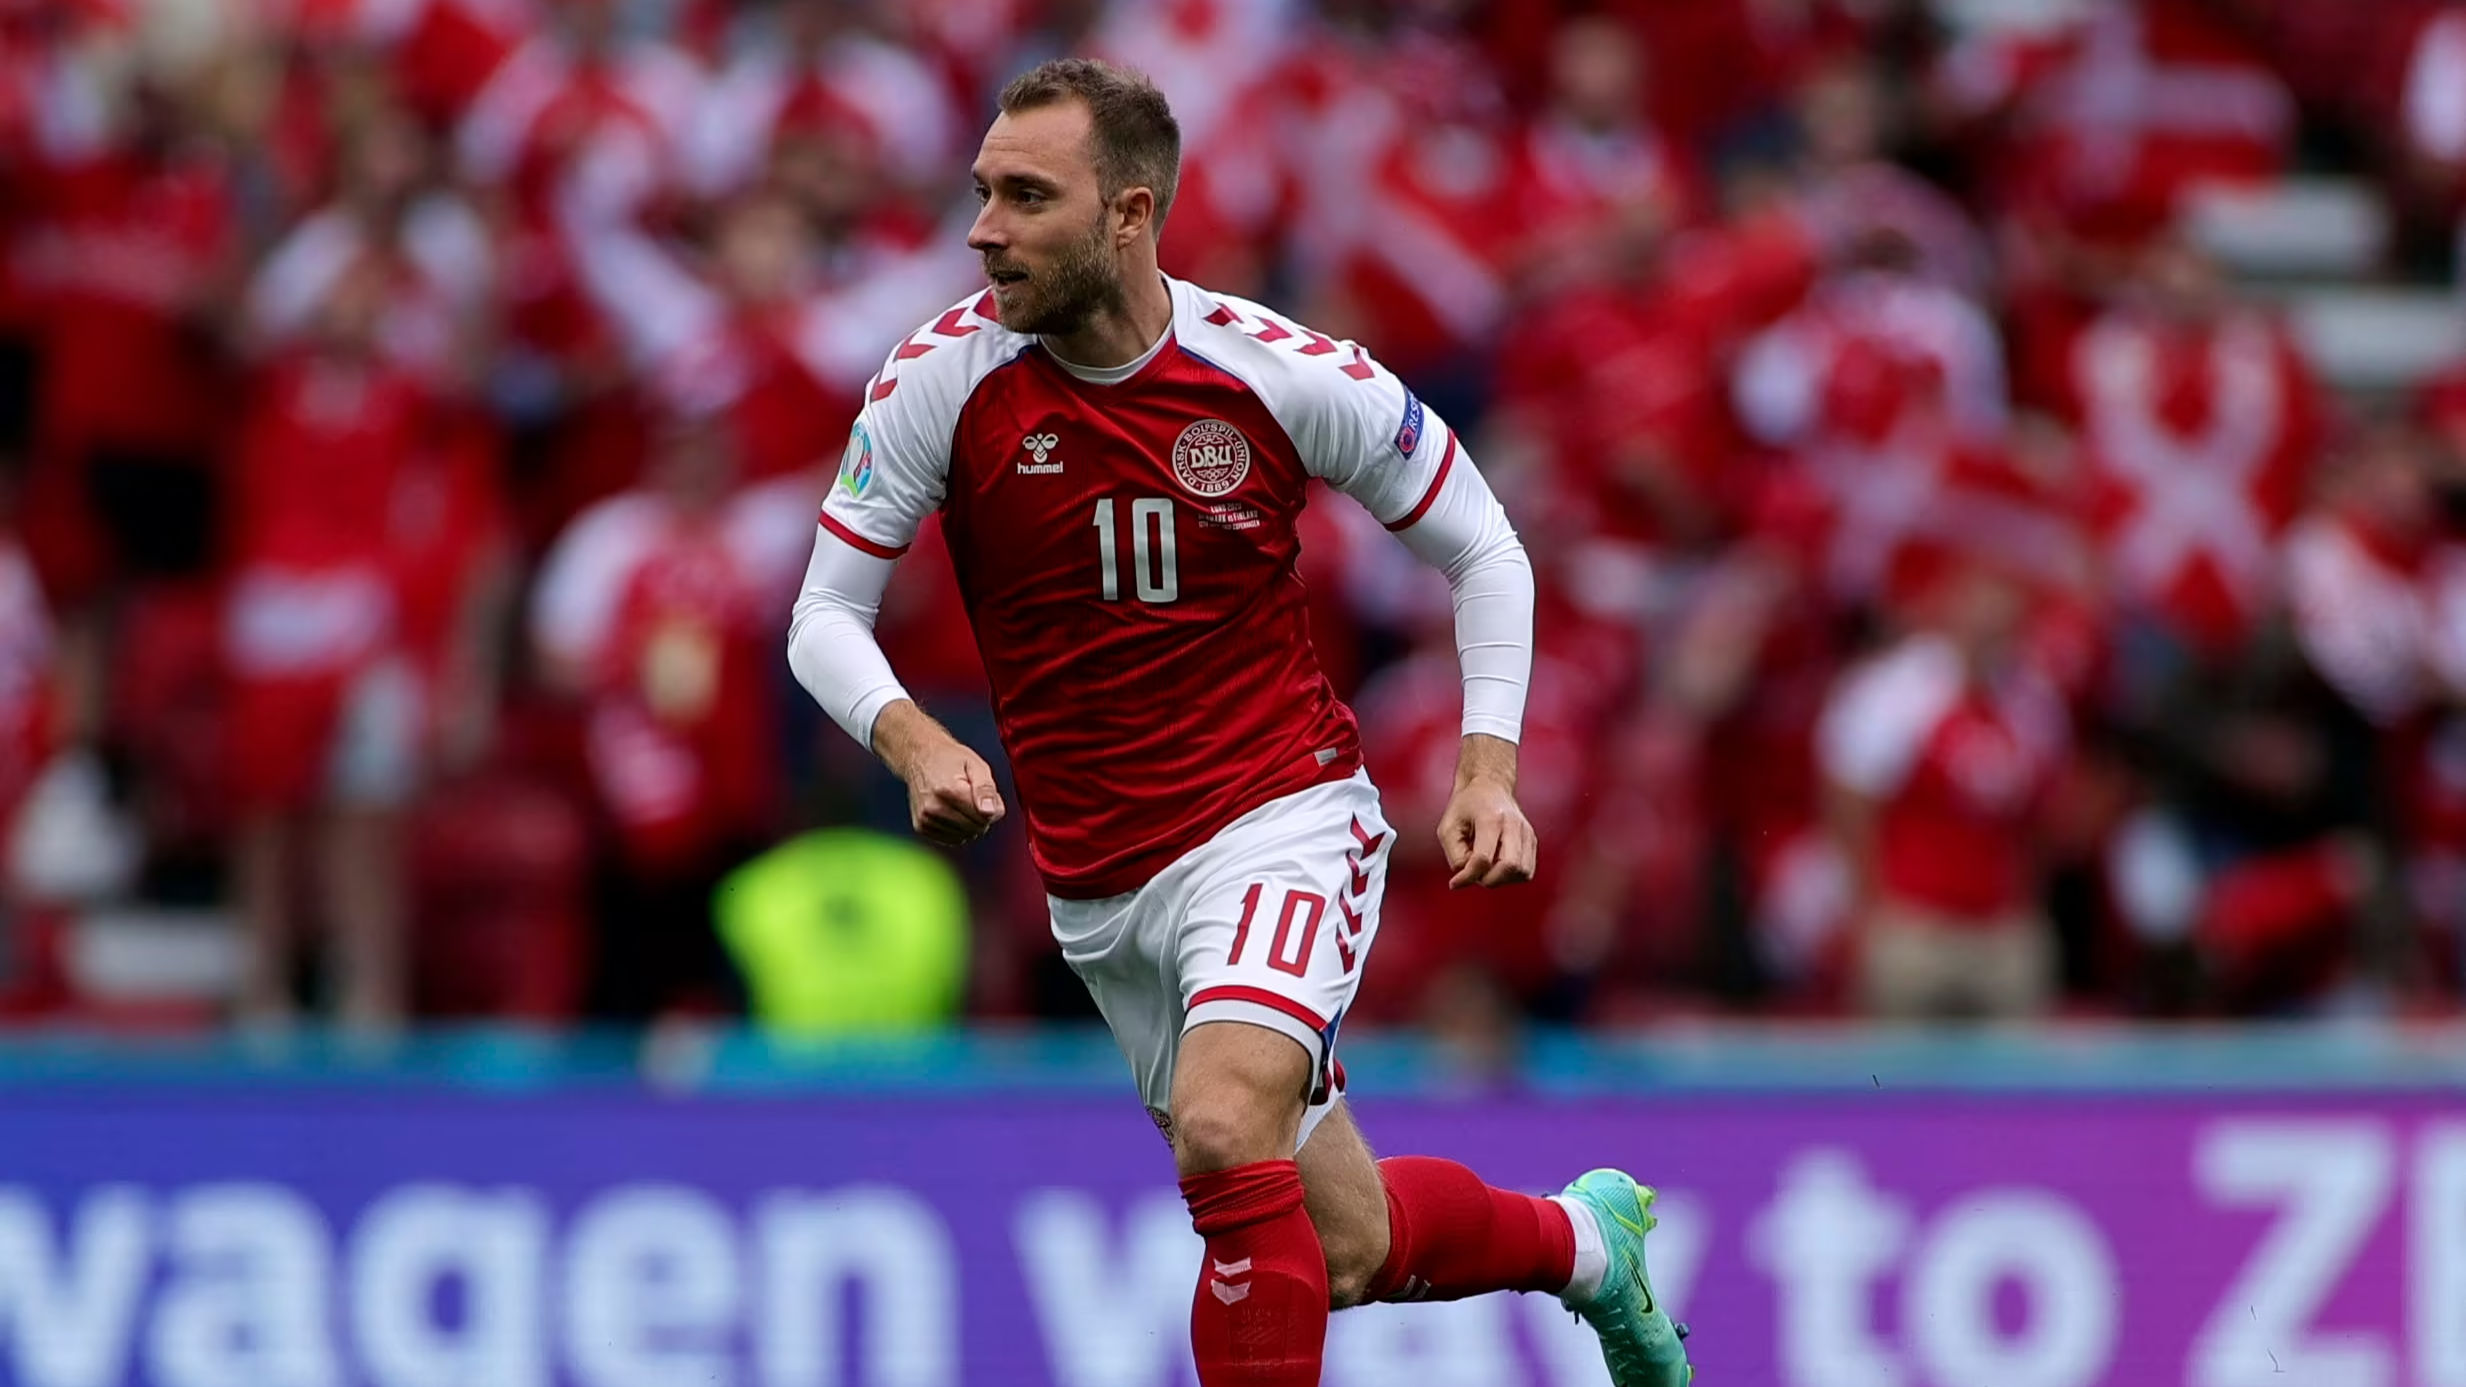 Christian Eriksen wants to play at Qatar 2022, says he is back to full fitness